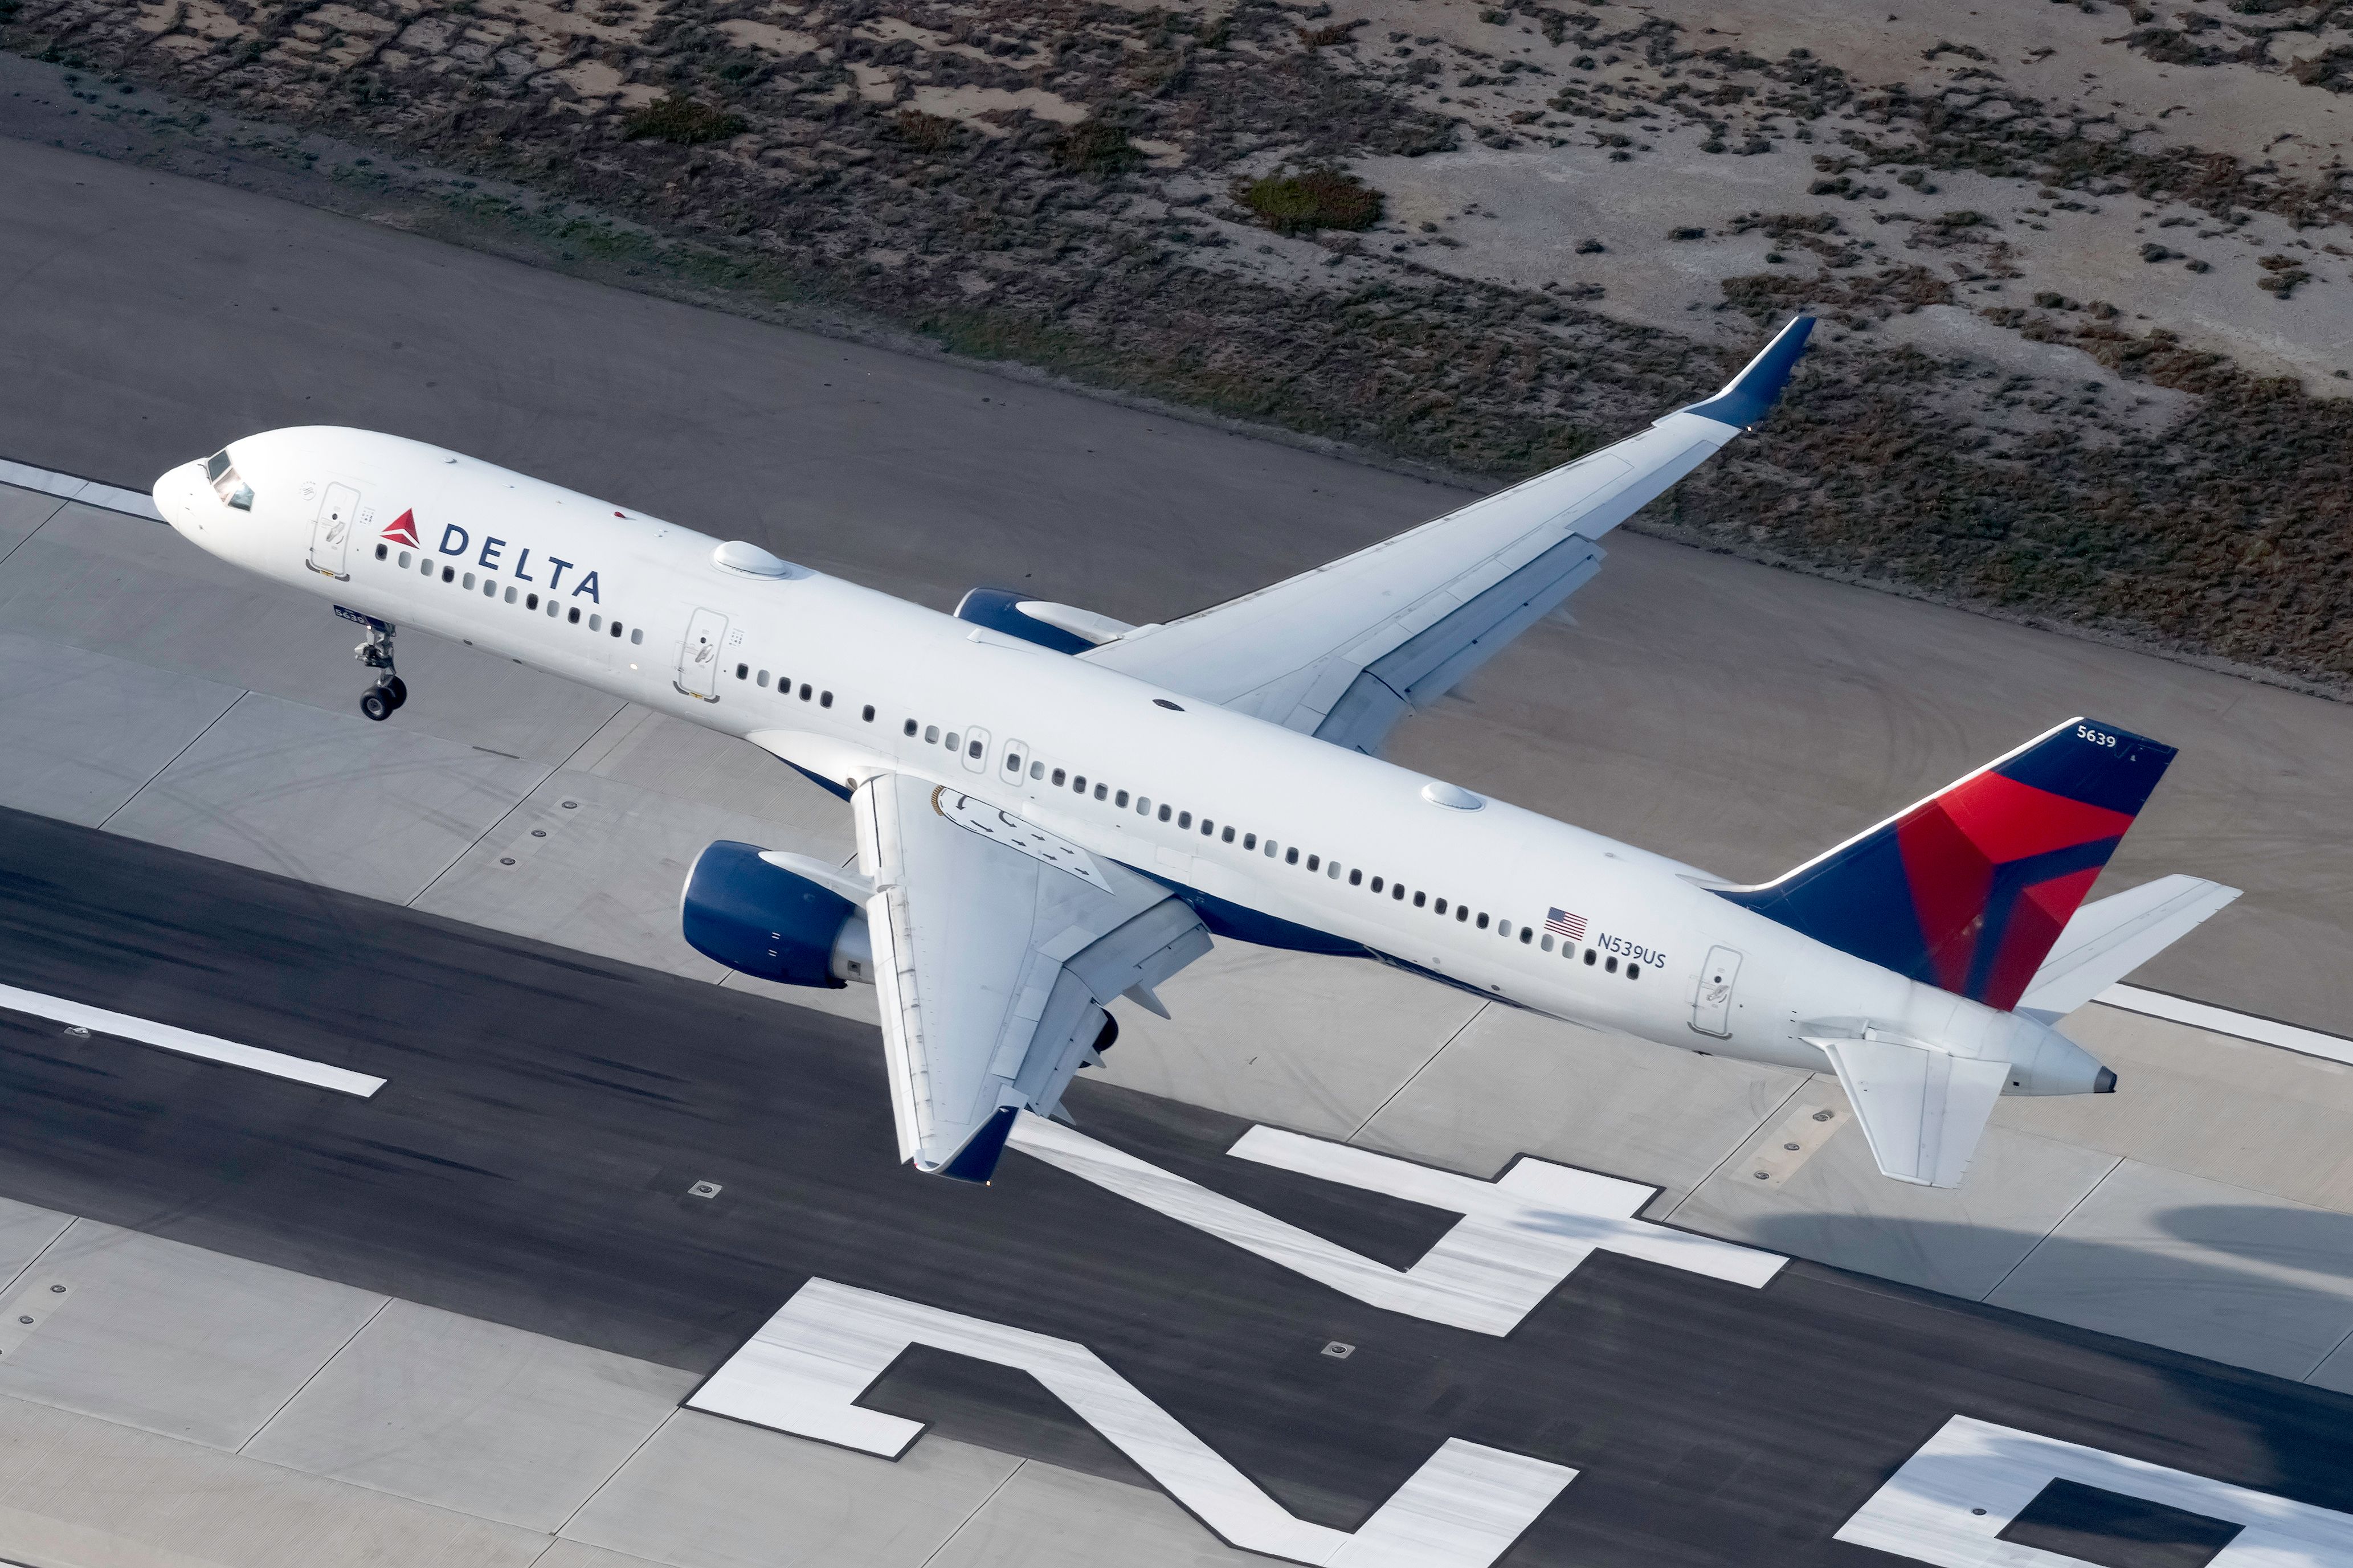 A Delta Air Lines Boeing 757-200 About to land on a runway.